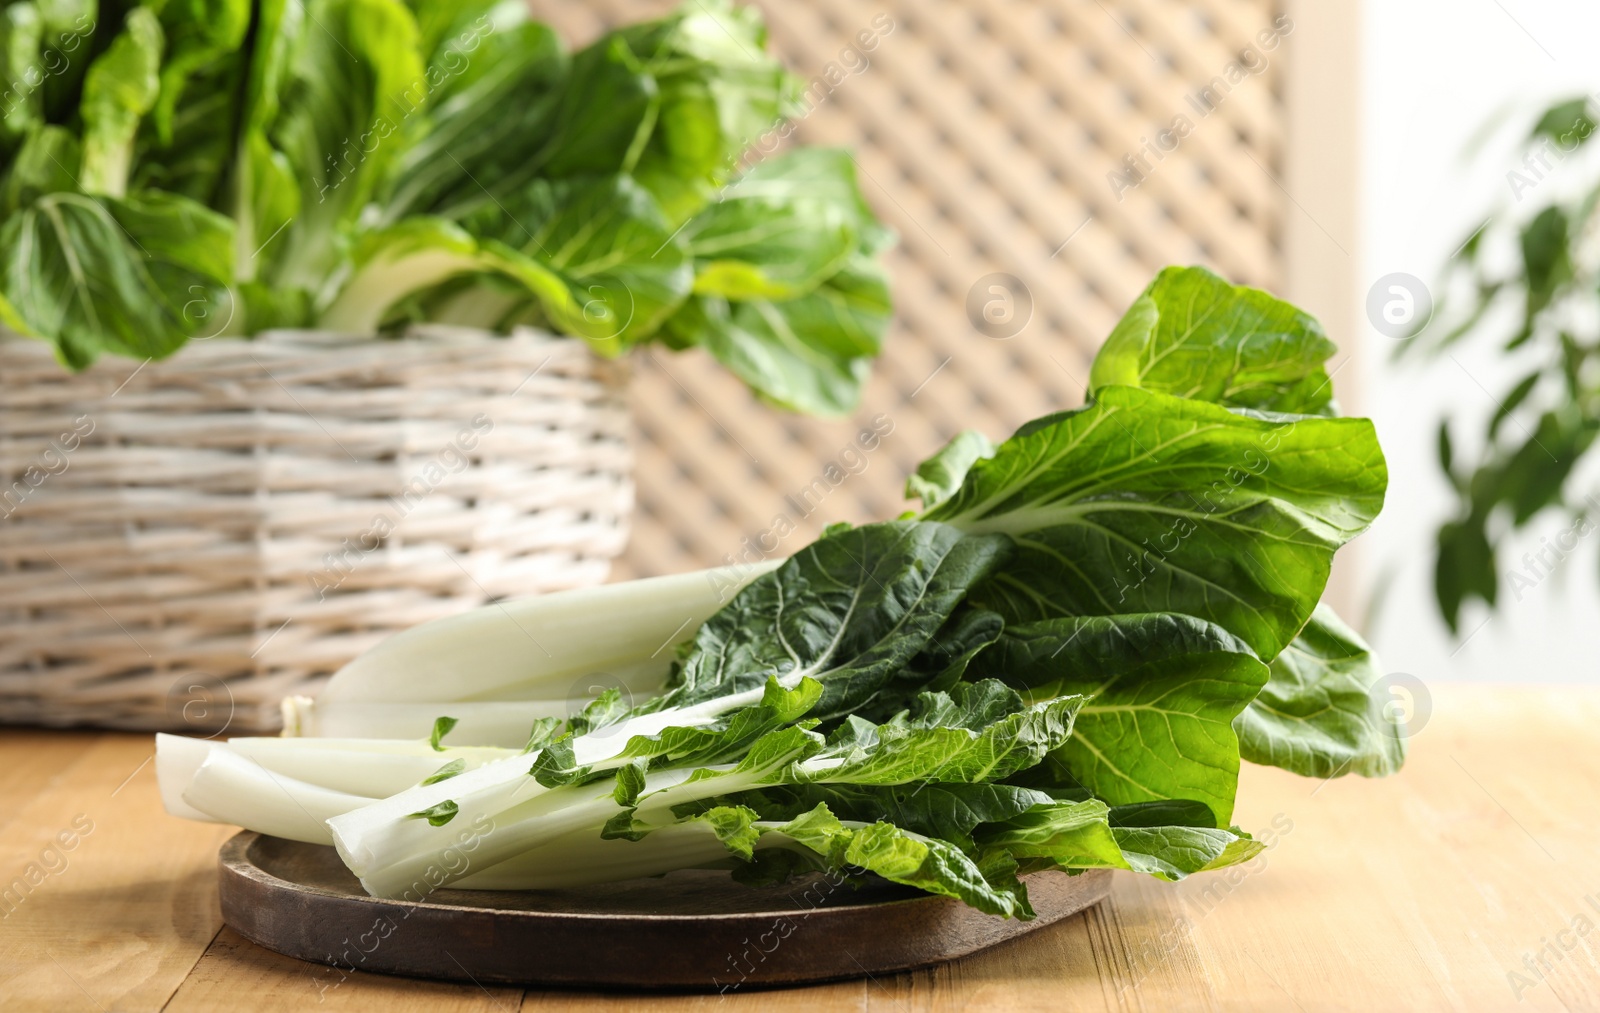 Photo of Leaves of fresh green pak choy cabbage on wooden table